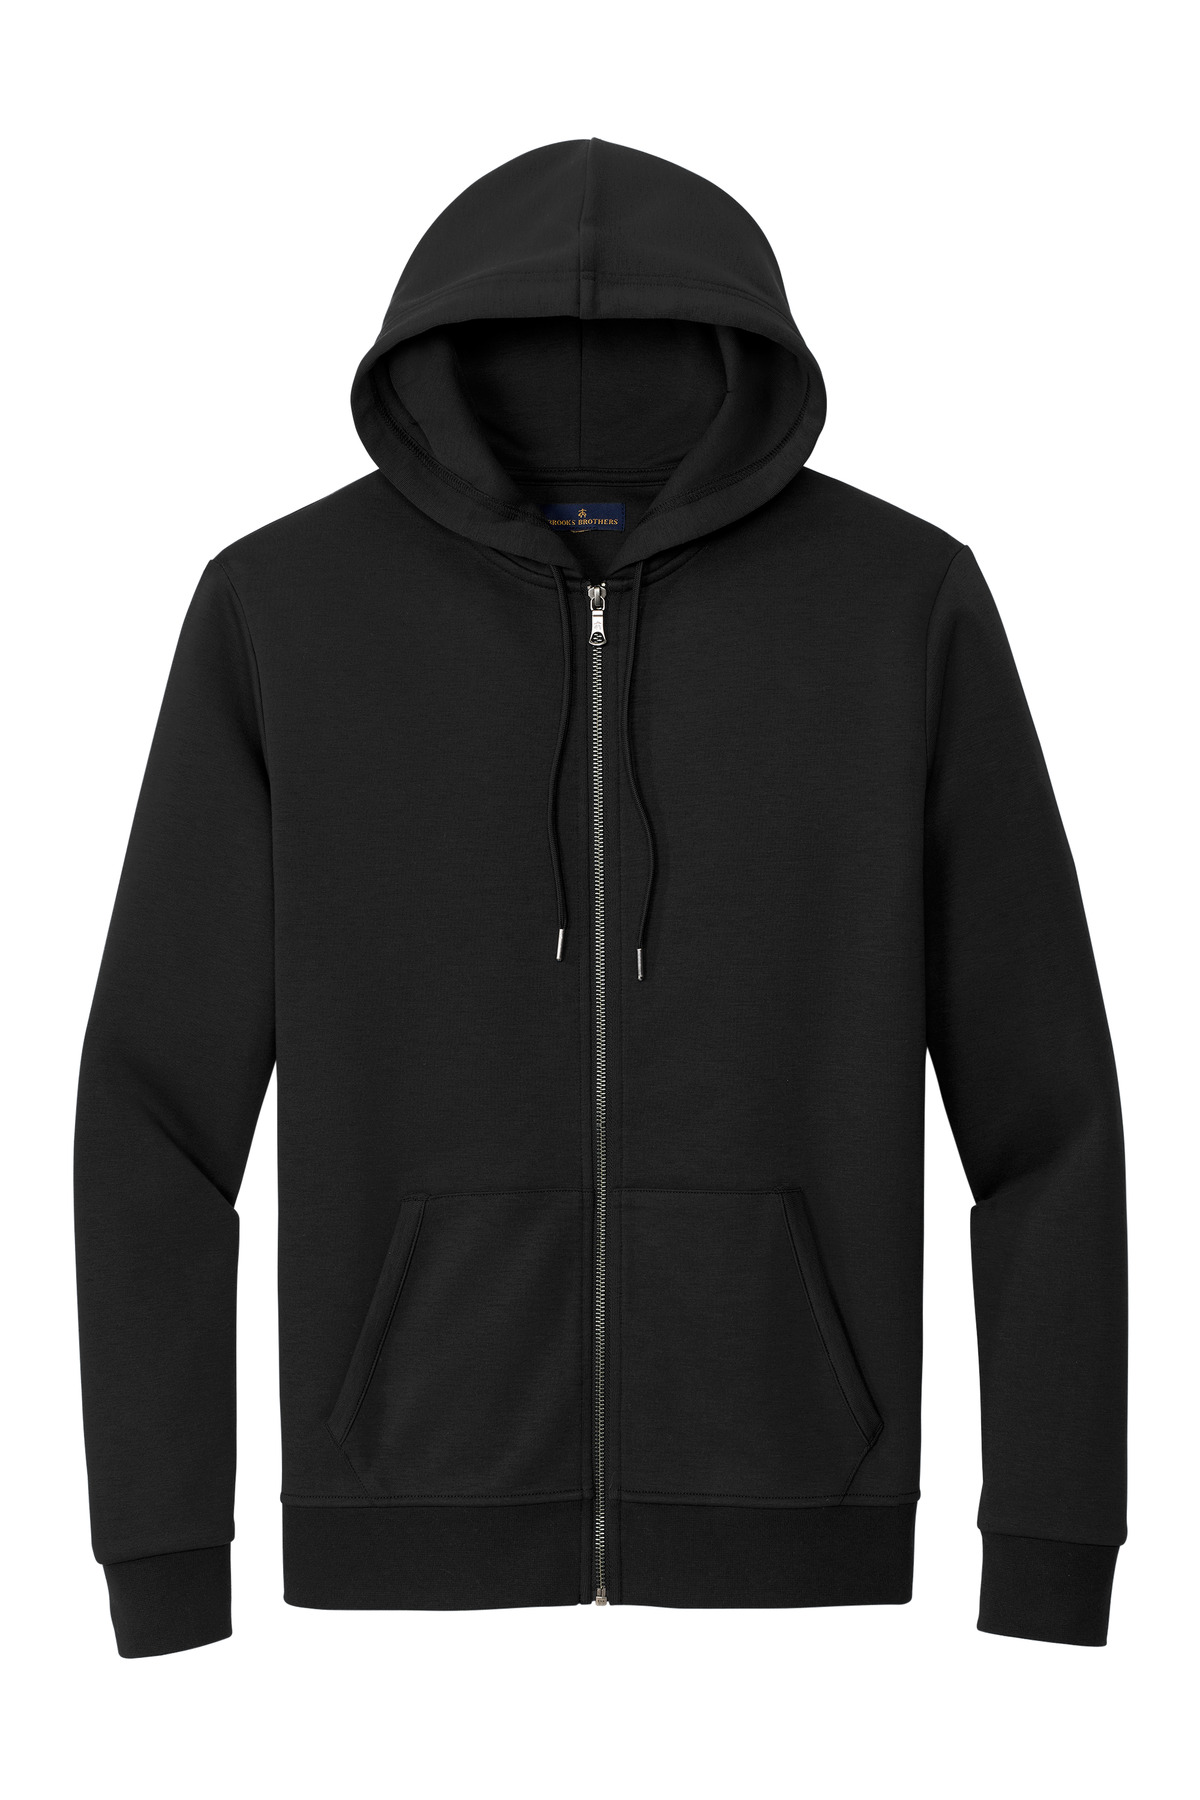 Brooks Brothers Double-Knit Full-Zip Hoodie BB18208